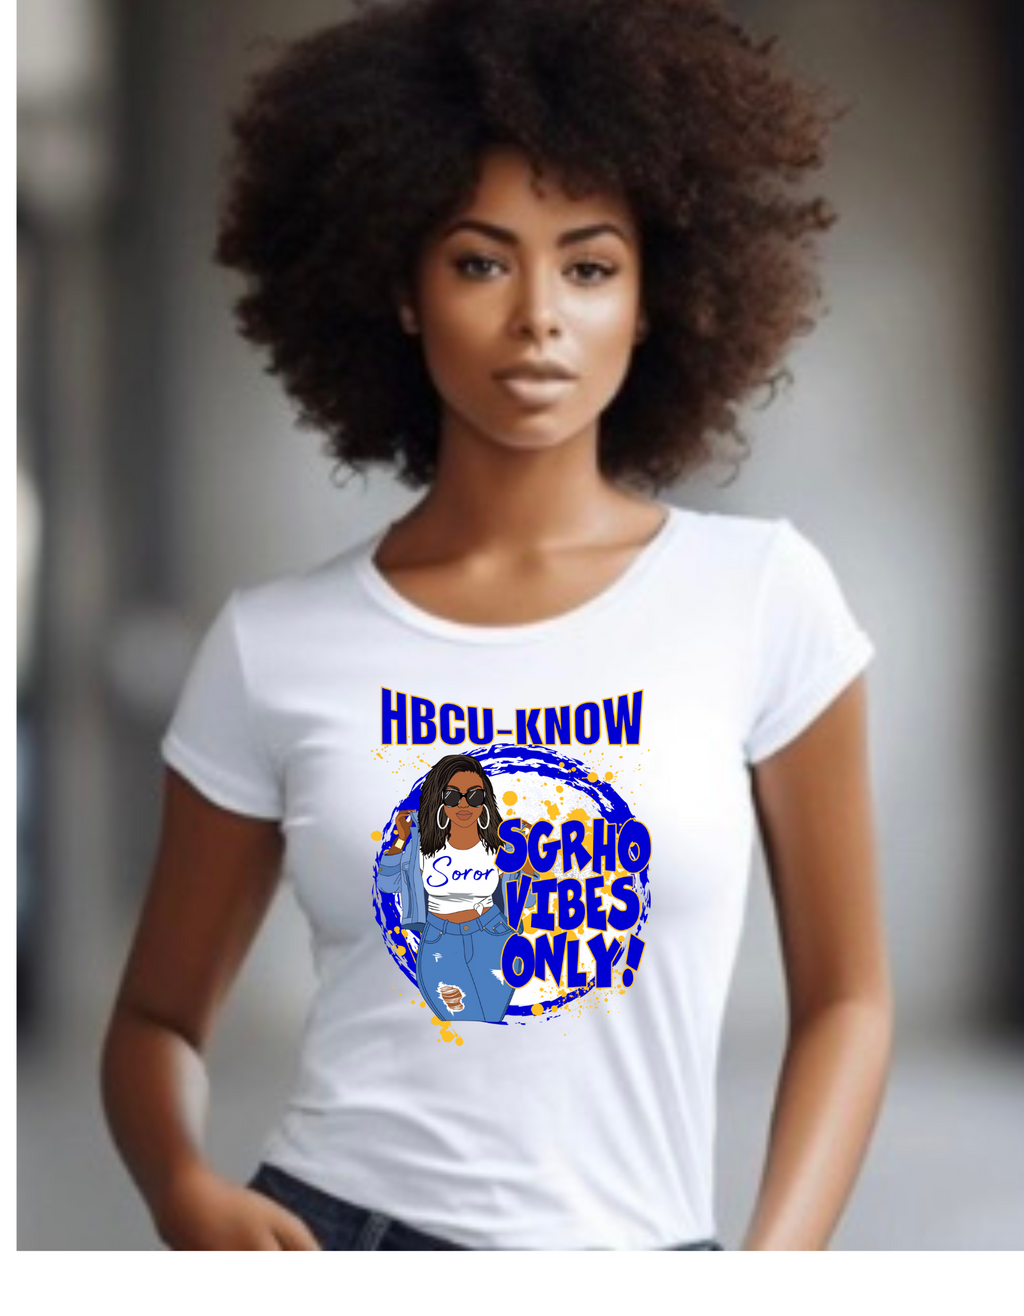 SGRHO- HBCU You Know Vibes Only